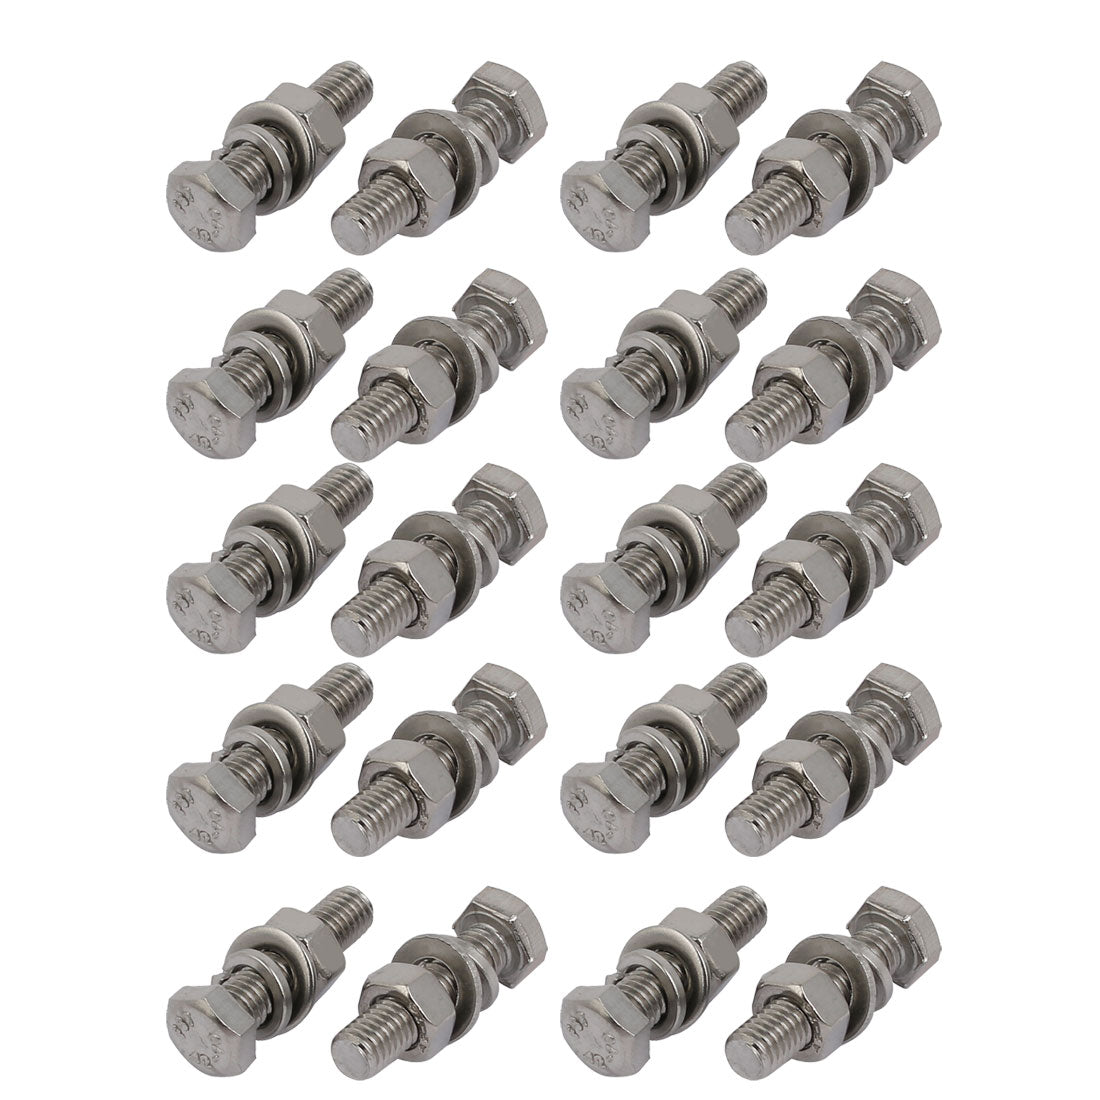 uxcell Uxcell 20pcs 304 Stainless Steel M5x20mm Hex Bolts w Nuts and Washers Assortment Kit